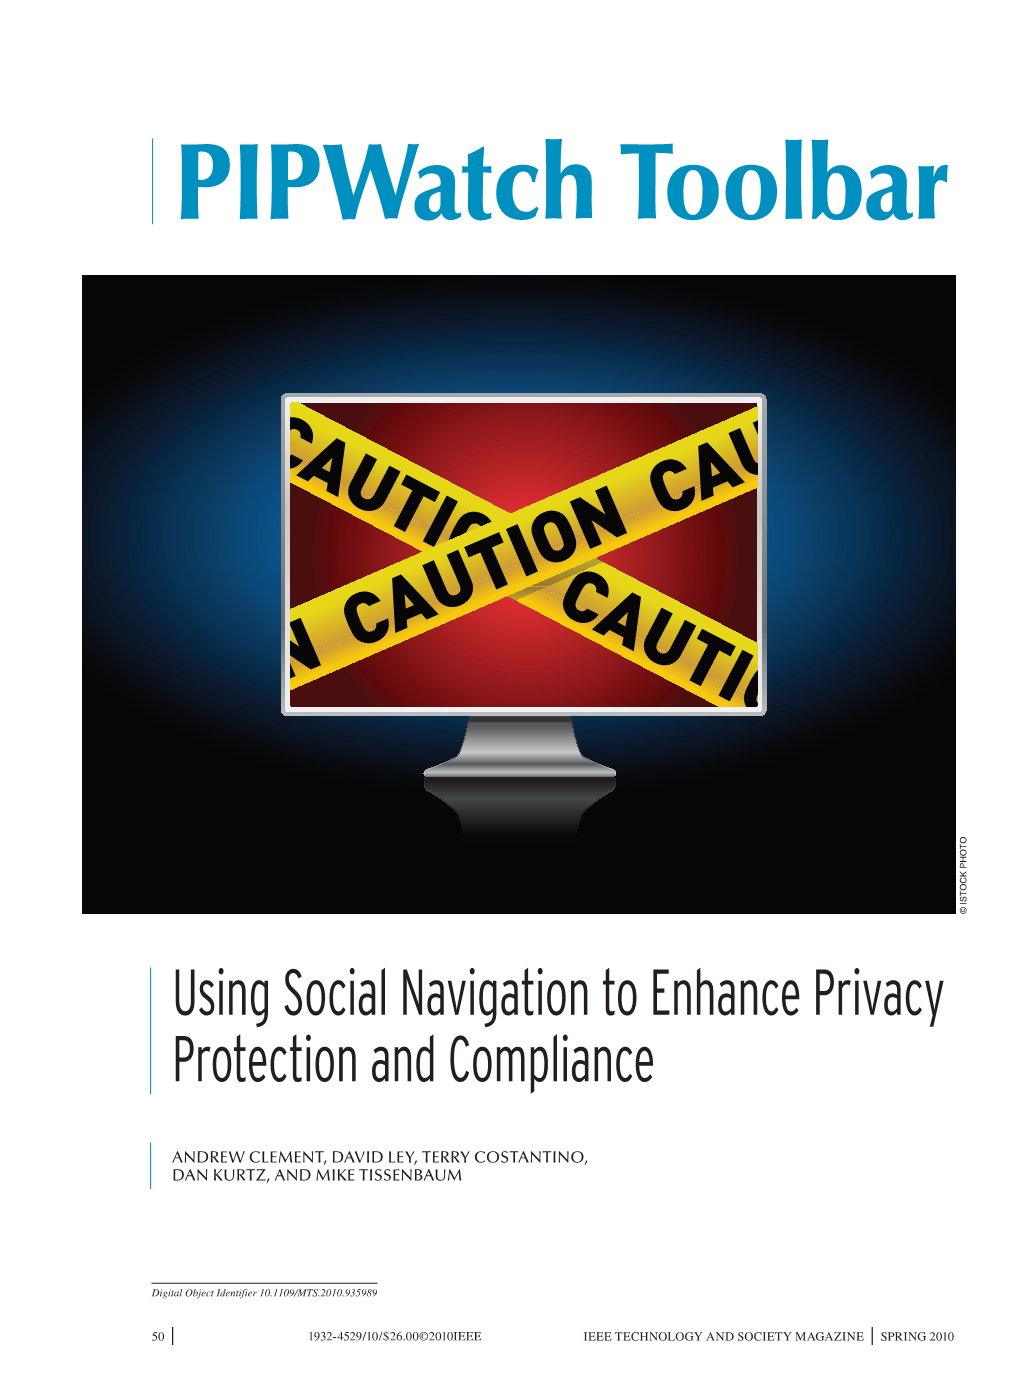 Pipwatch Toolbar © ISTOCK PHOTO Using Social Navigation to Enhance Privacy Protection and Compliance